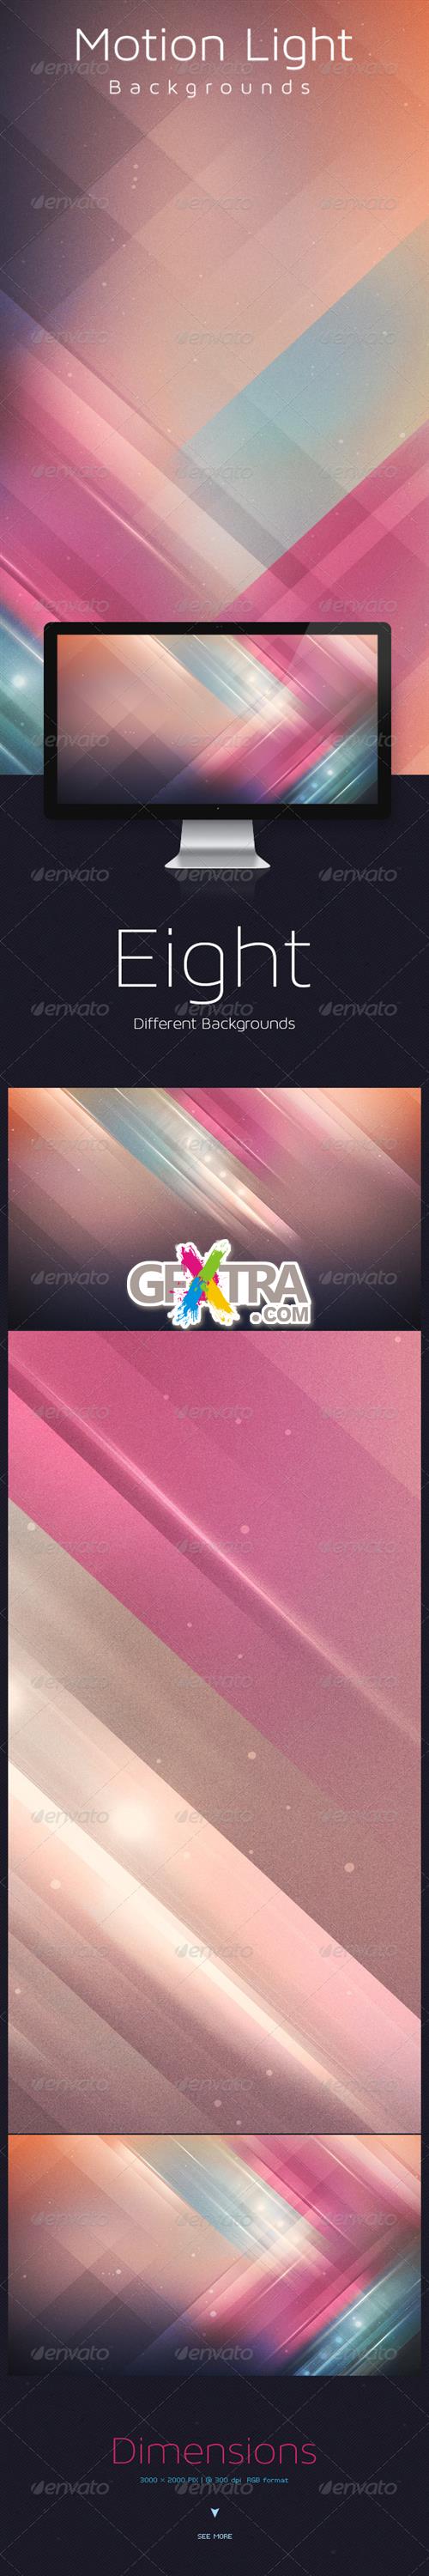 GraphicRiver - Motion Light Backgrounds